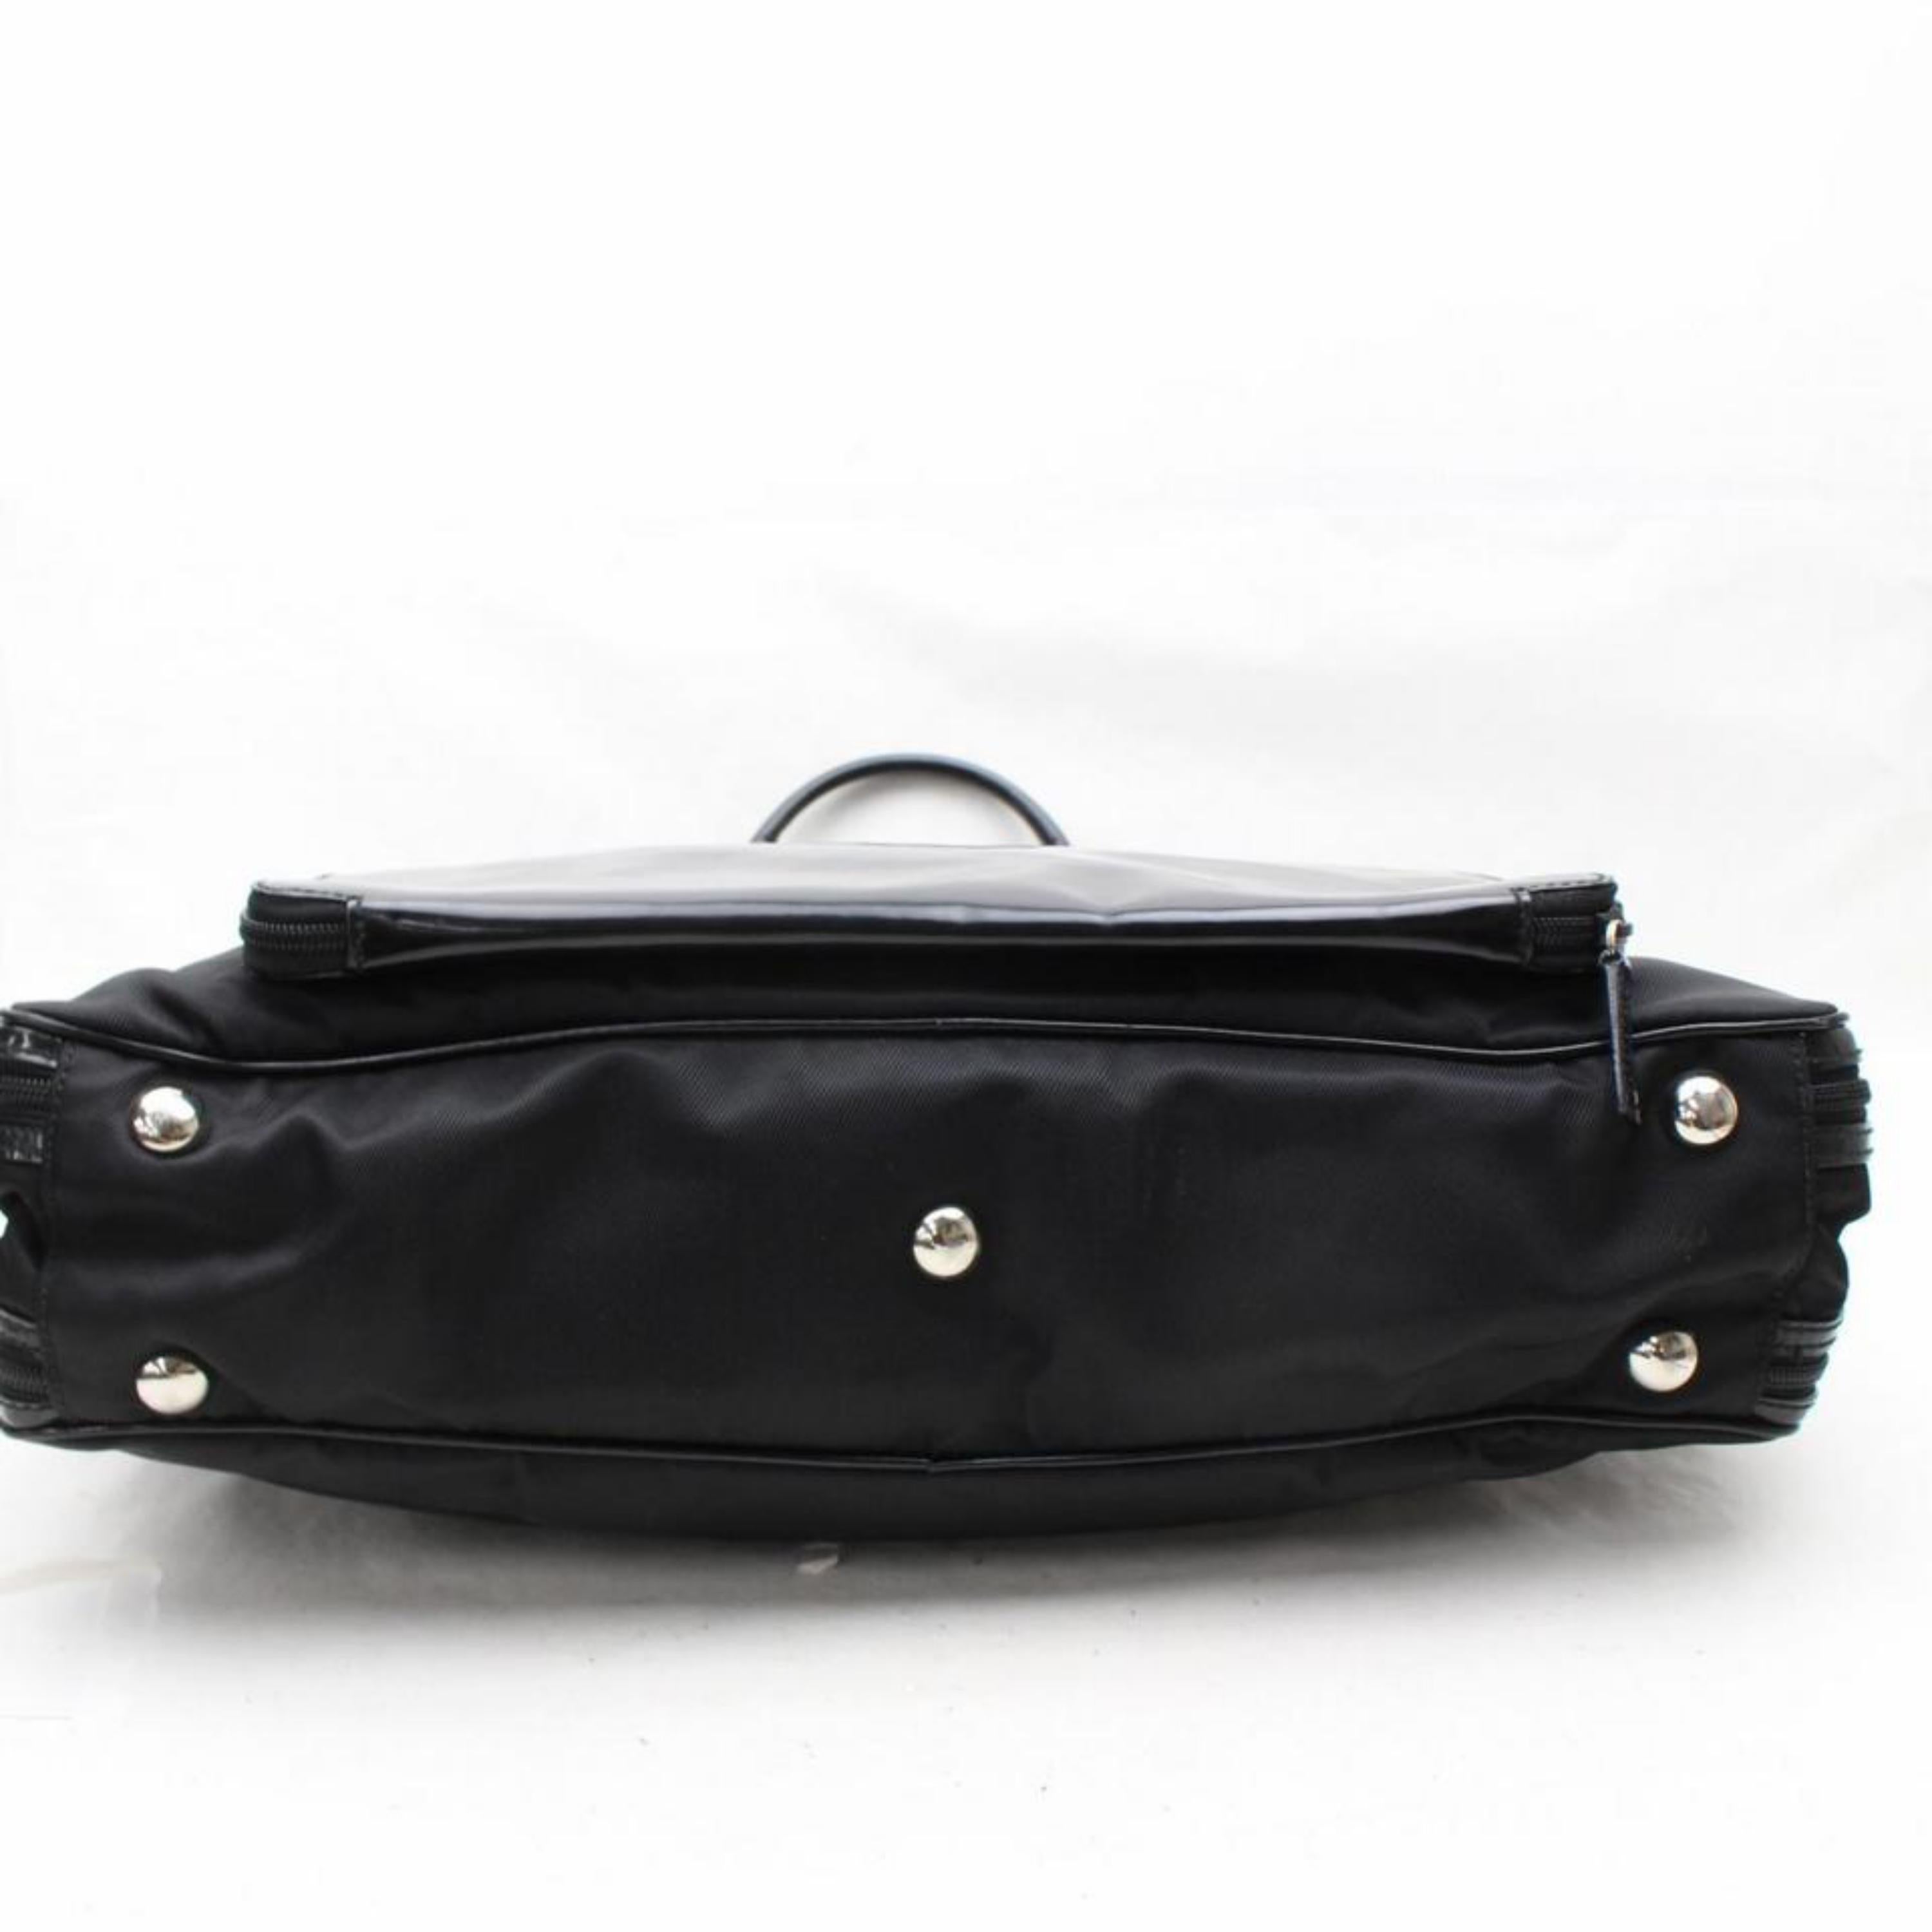 Gucci Rare Suitcase 867675 Black Canvas Weekend/Travel Bag For Sale 5